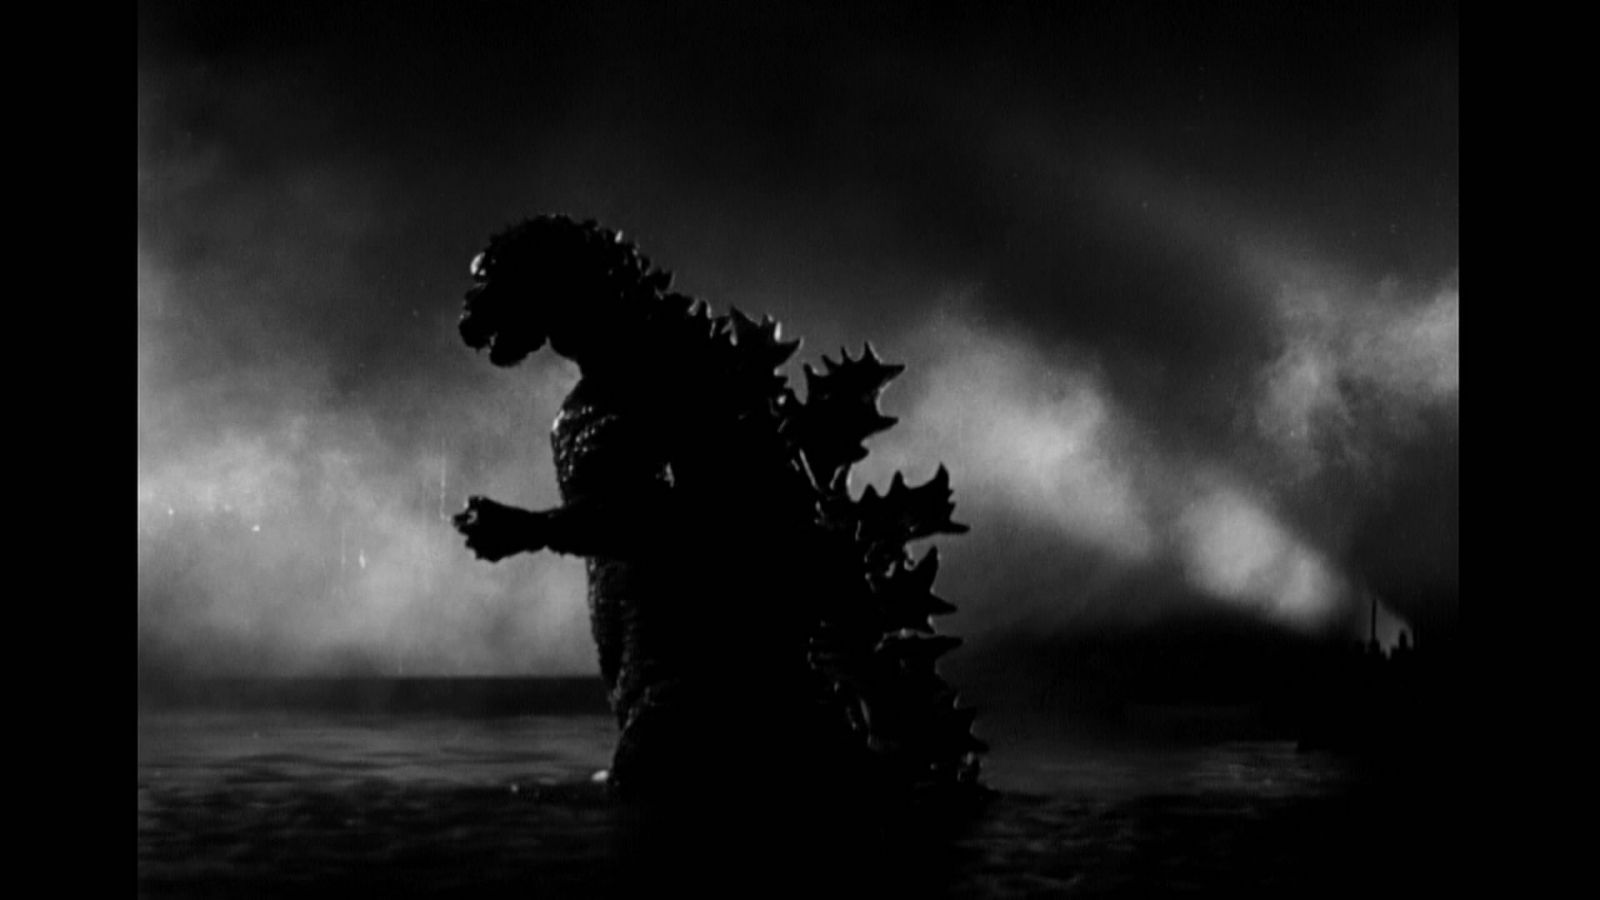 Free download Godzilla 1954 Wallpaper Traditional as in 1954 style [1920x1080] for your Desktop, Mobile & Tablet. Explore Wallpaper Godzilla 1954. Wallpaper Godzilla Godzilla Wallpaper, Godzilla Wallpaper